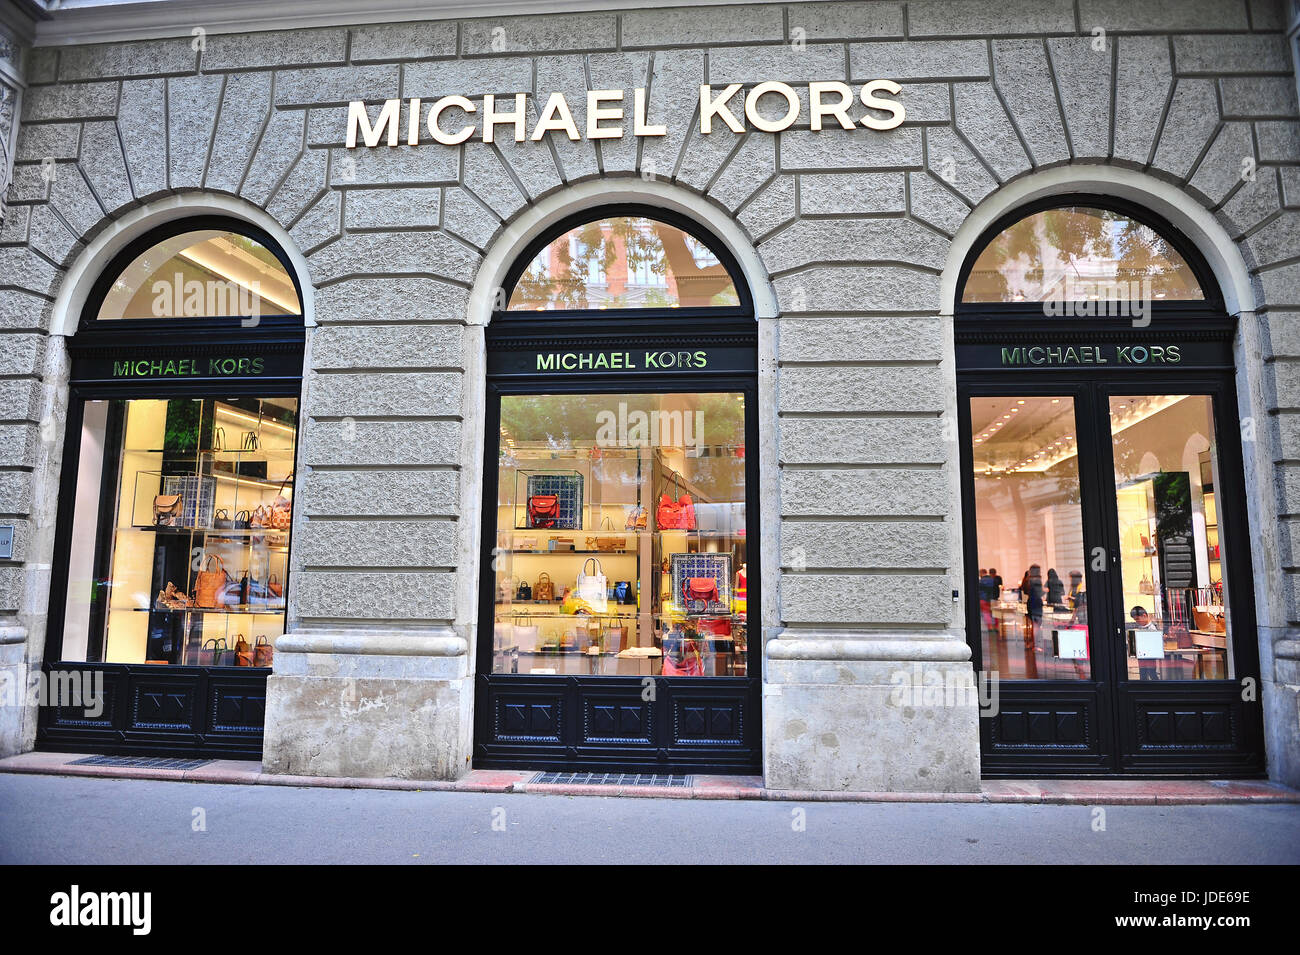 BUDAPEST, HUNGARY - JUNE 4: Facade of Michael Kors flagship store in the  street of Budapest on June 4, 2016 Stock Photo - Alamy